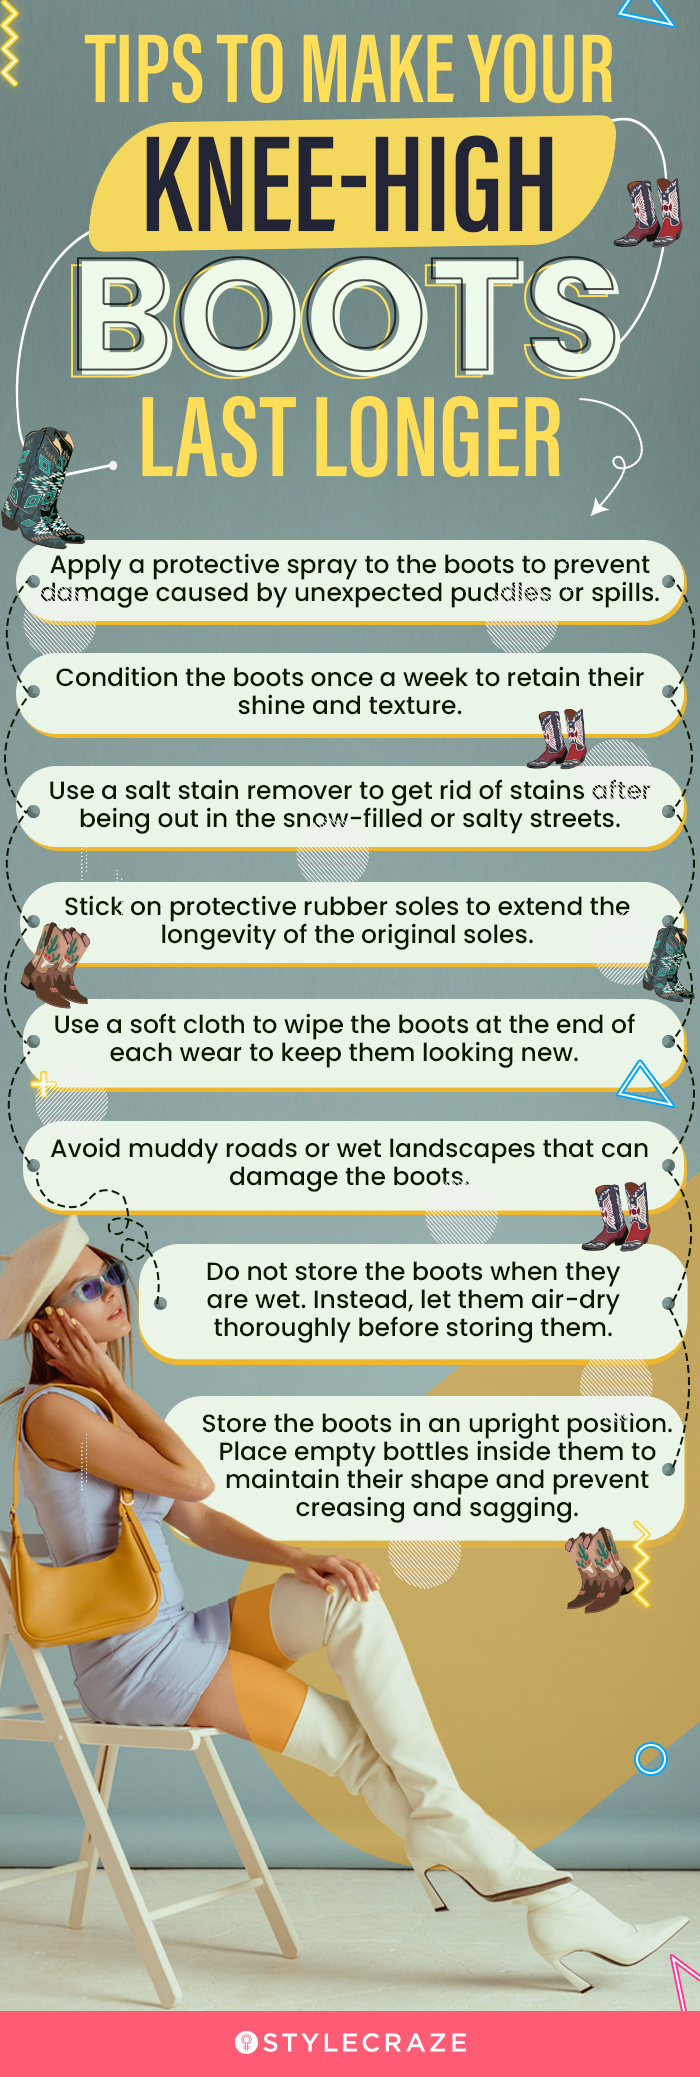 Tips To Make Your Knee-High Boots Last Longer (infographic)